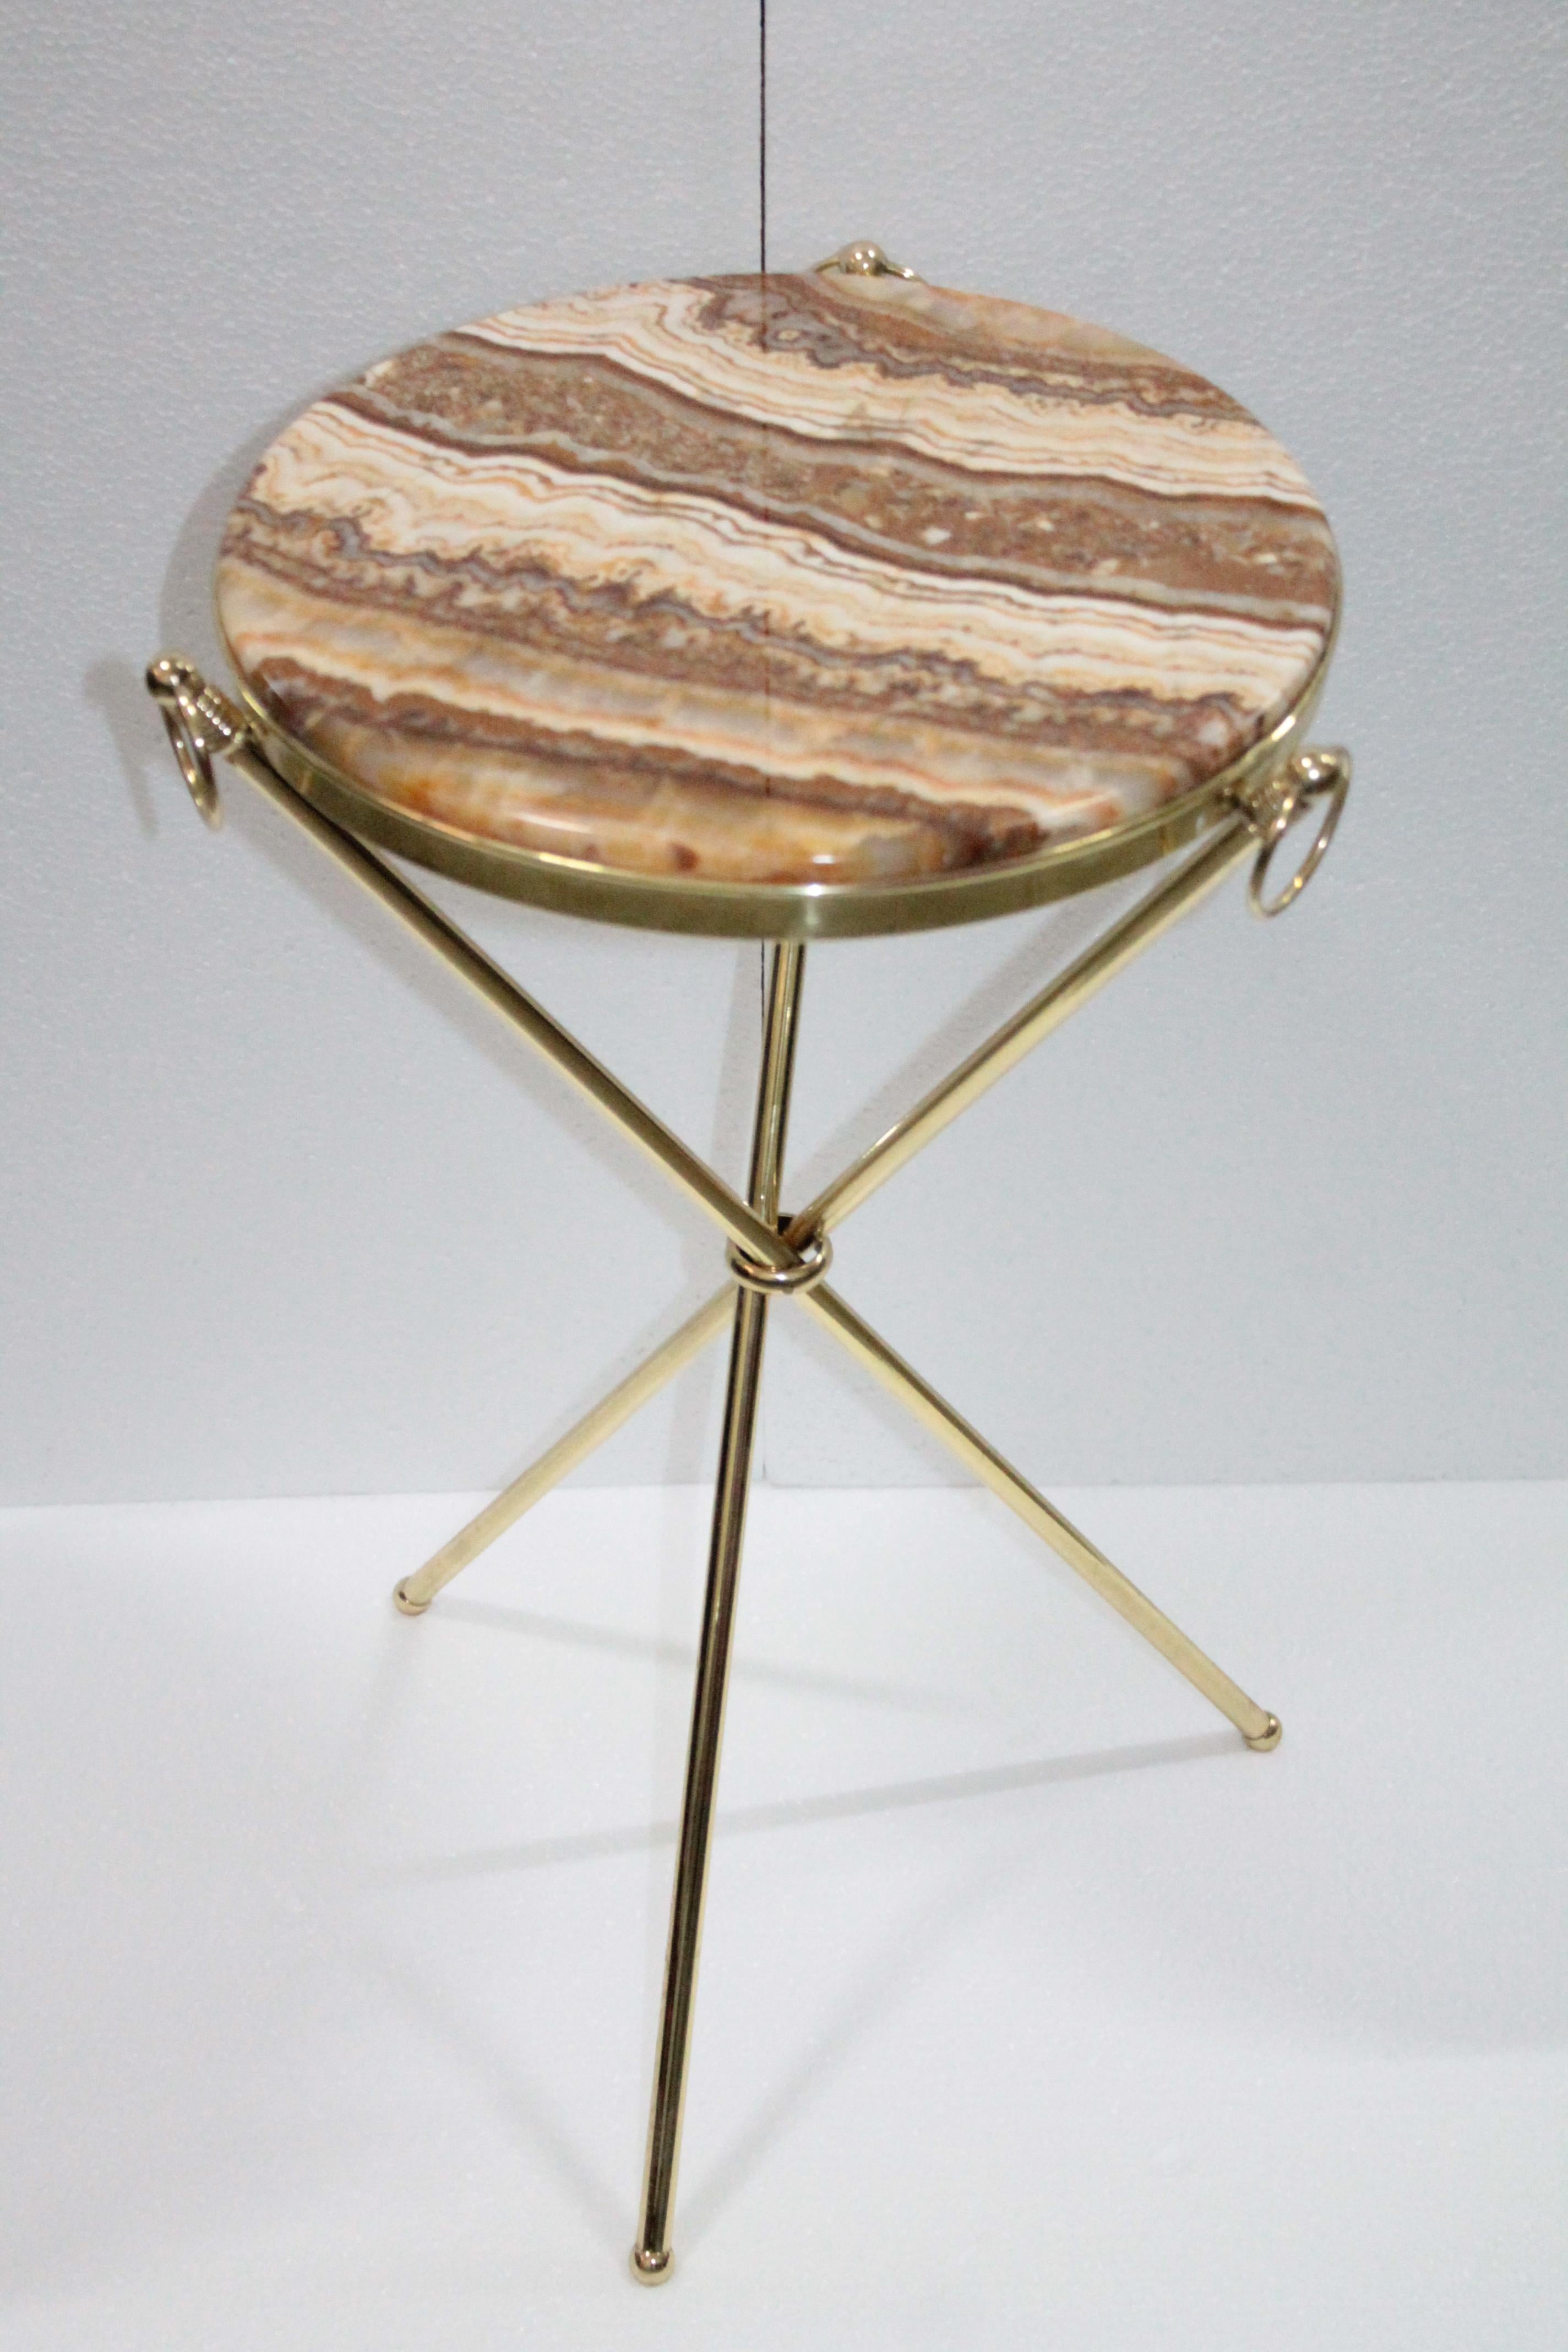 Midcentury Italian Tripod Round Side Table 1950s Brass and Onyx Marble 7